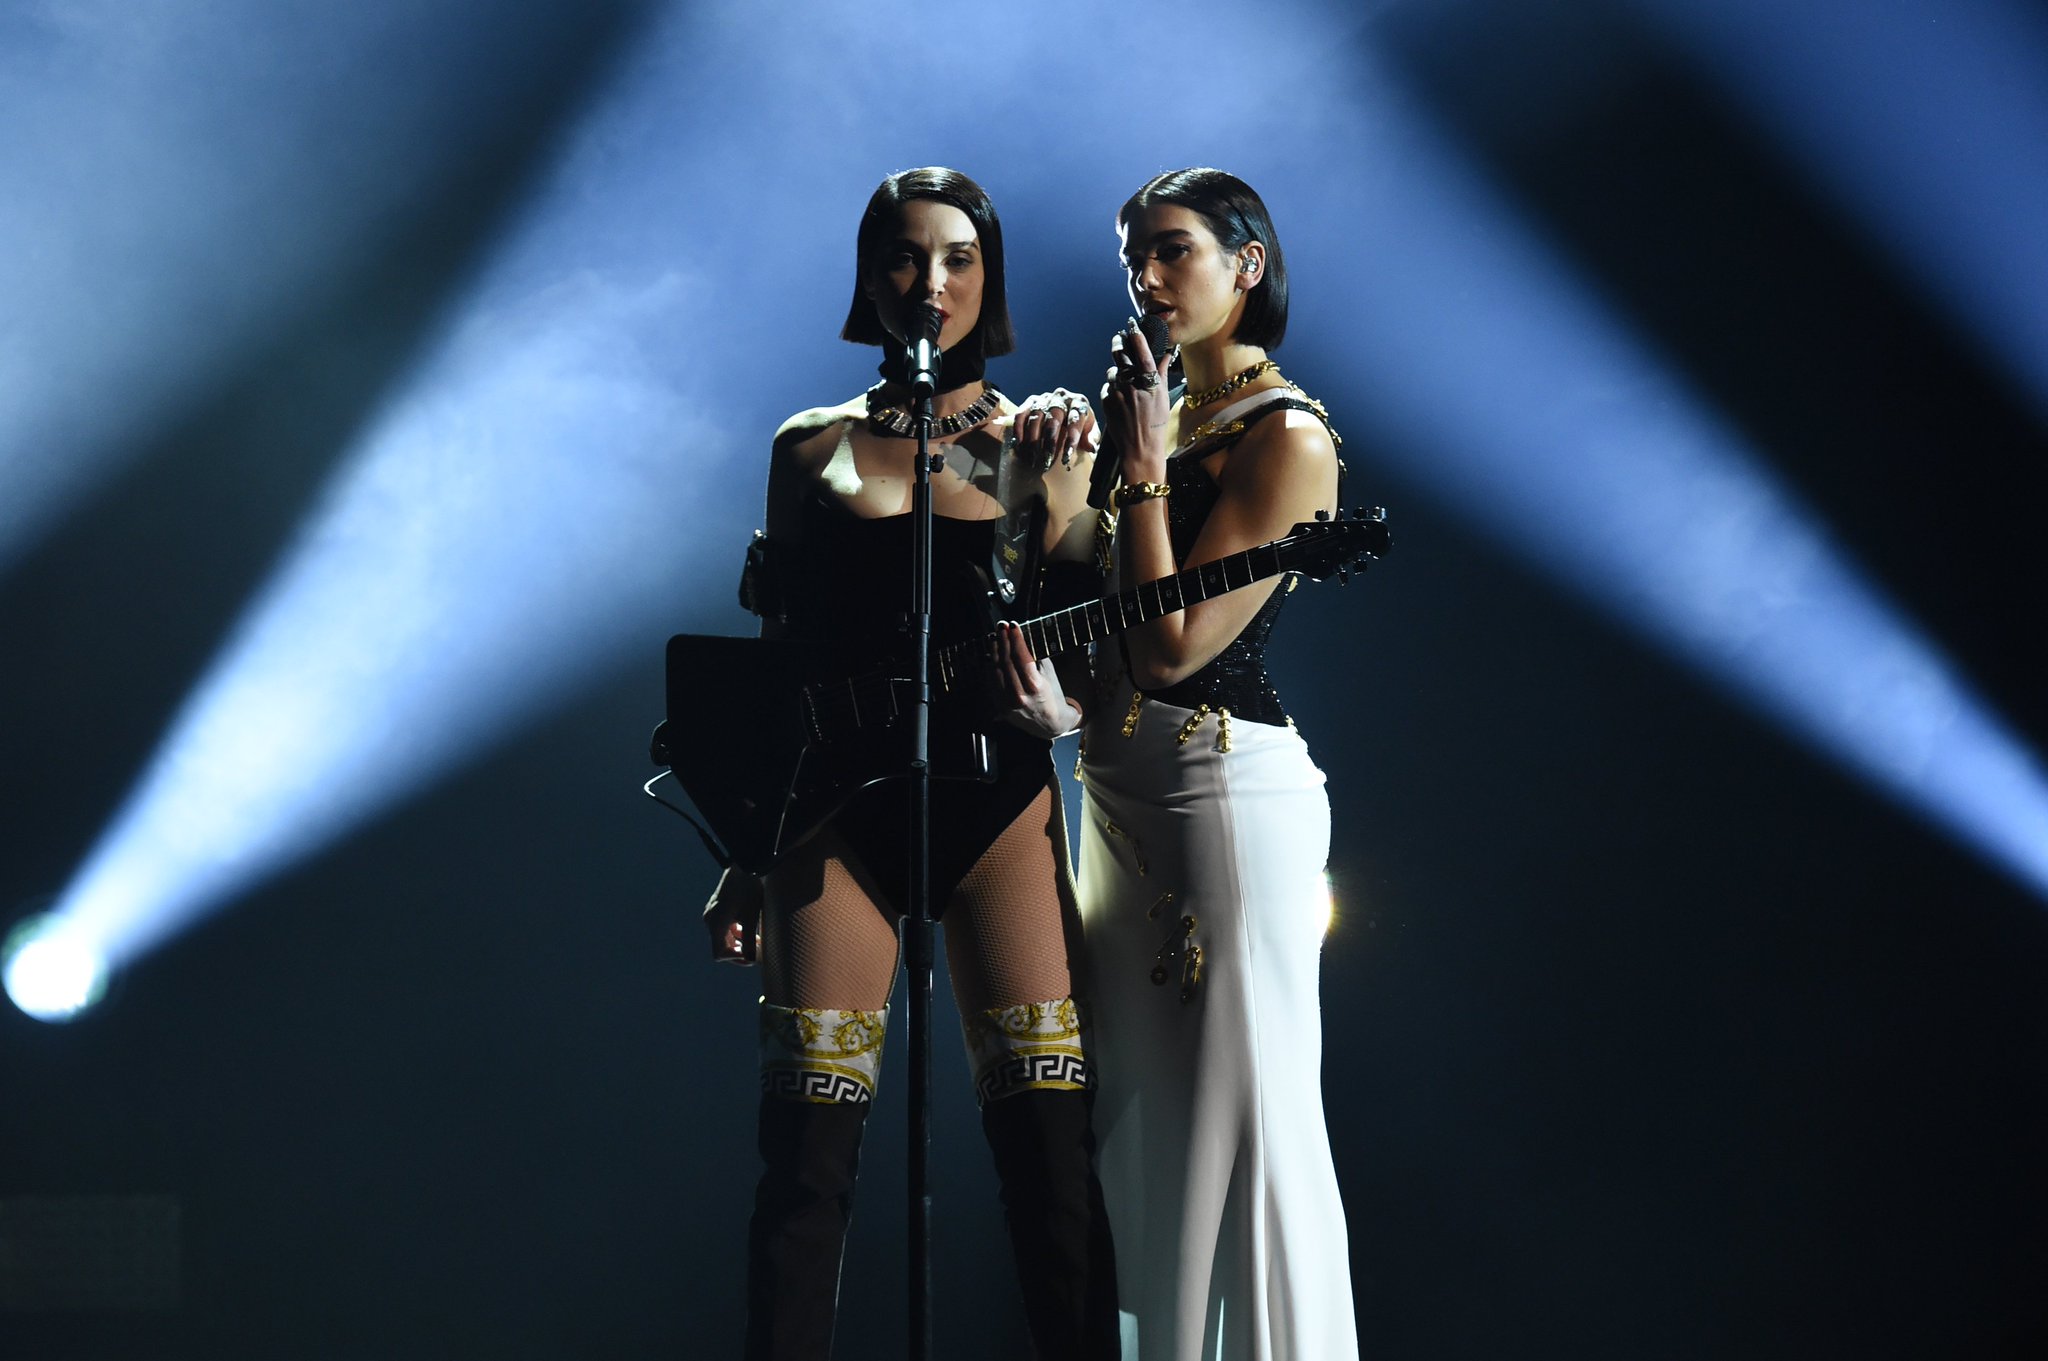 🎶 One kiss is all it takes Fallin’ in love with me Possibilities I look like all you need 🎶 @DUALIPA and @st_vincent performed a mesmerizing medley, including “One Kiss,” at this year’s #GRAMMYs. (@LyricFind)